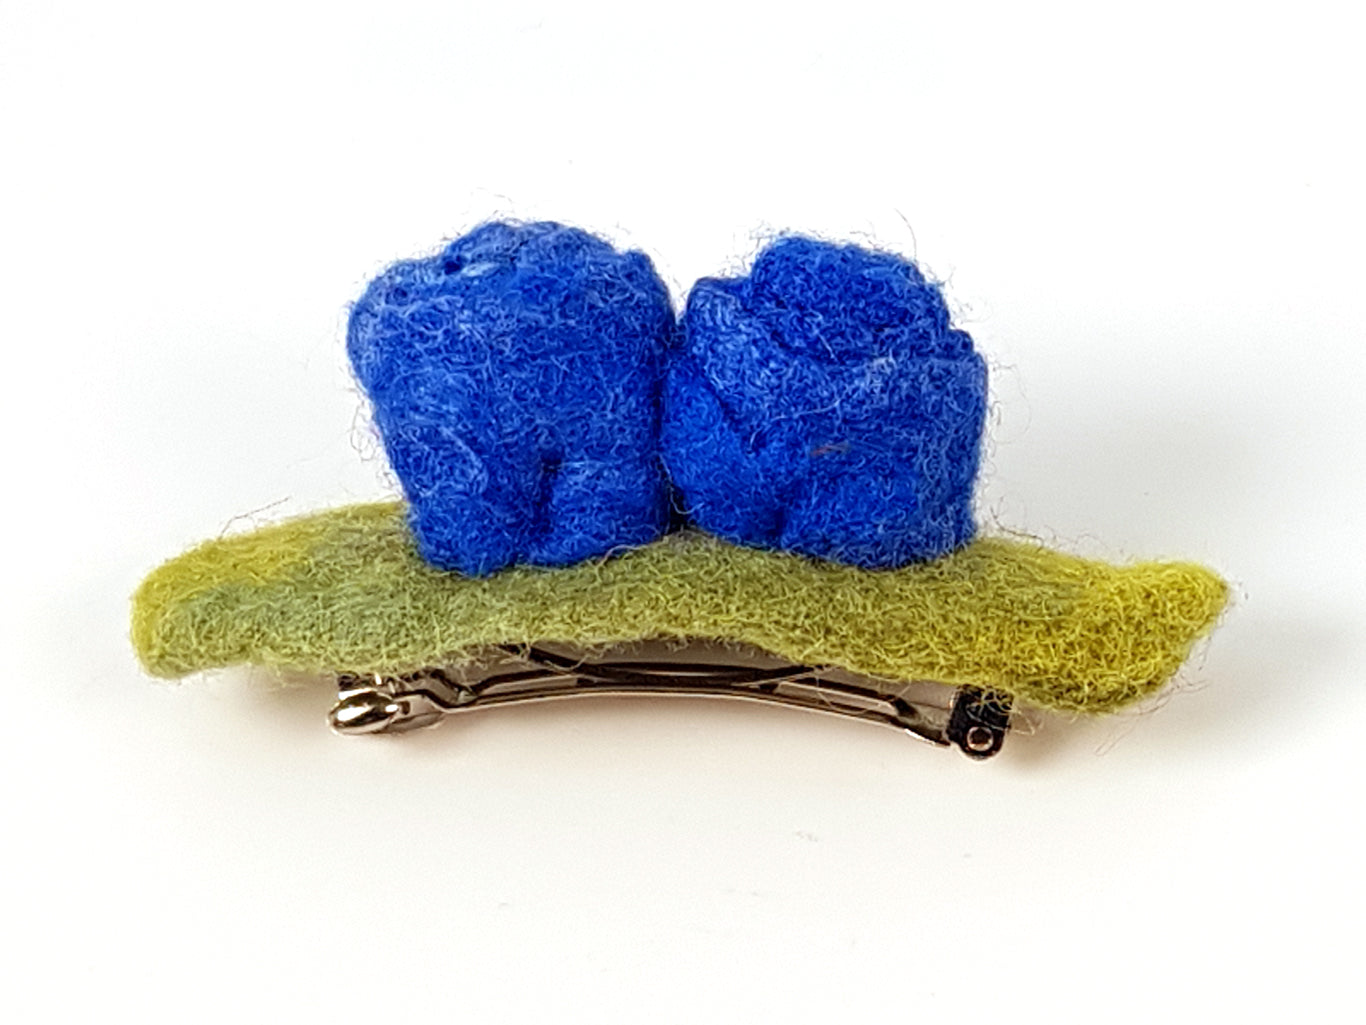 Felted Hair Clip - Two Blue Flowers